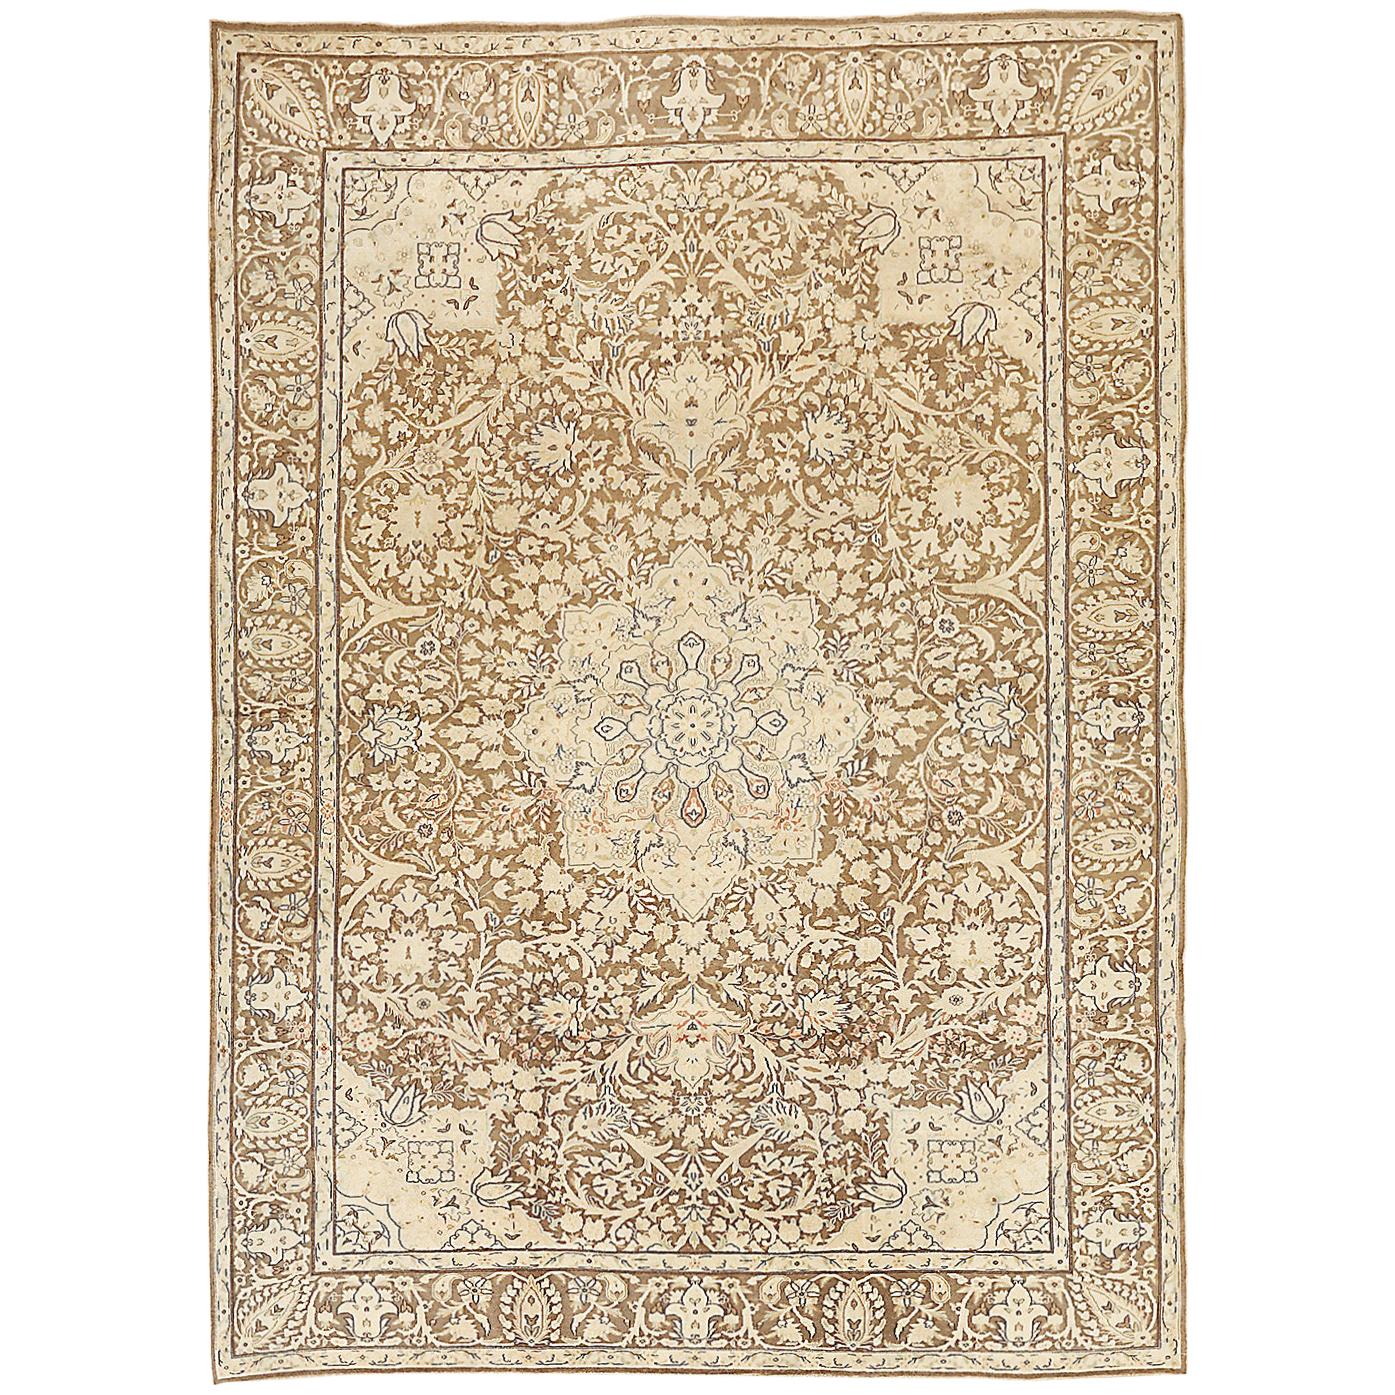 Antique Persian Kerman Rug with Black and Beige Floral Motif on Ivory Field For Sale